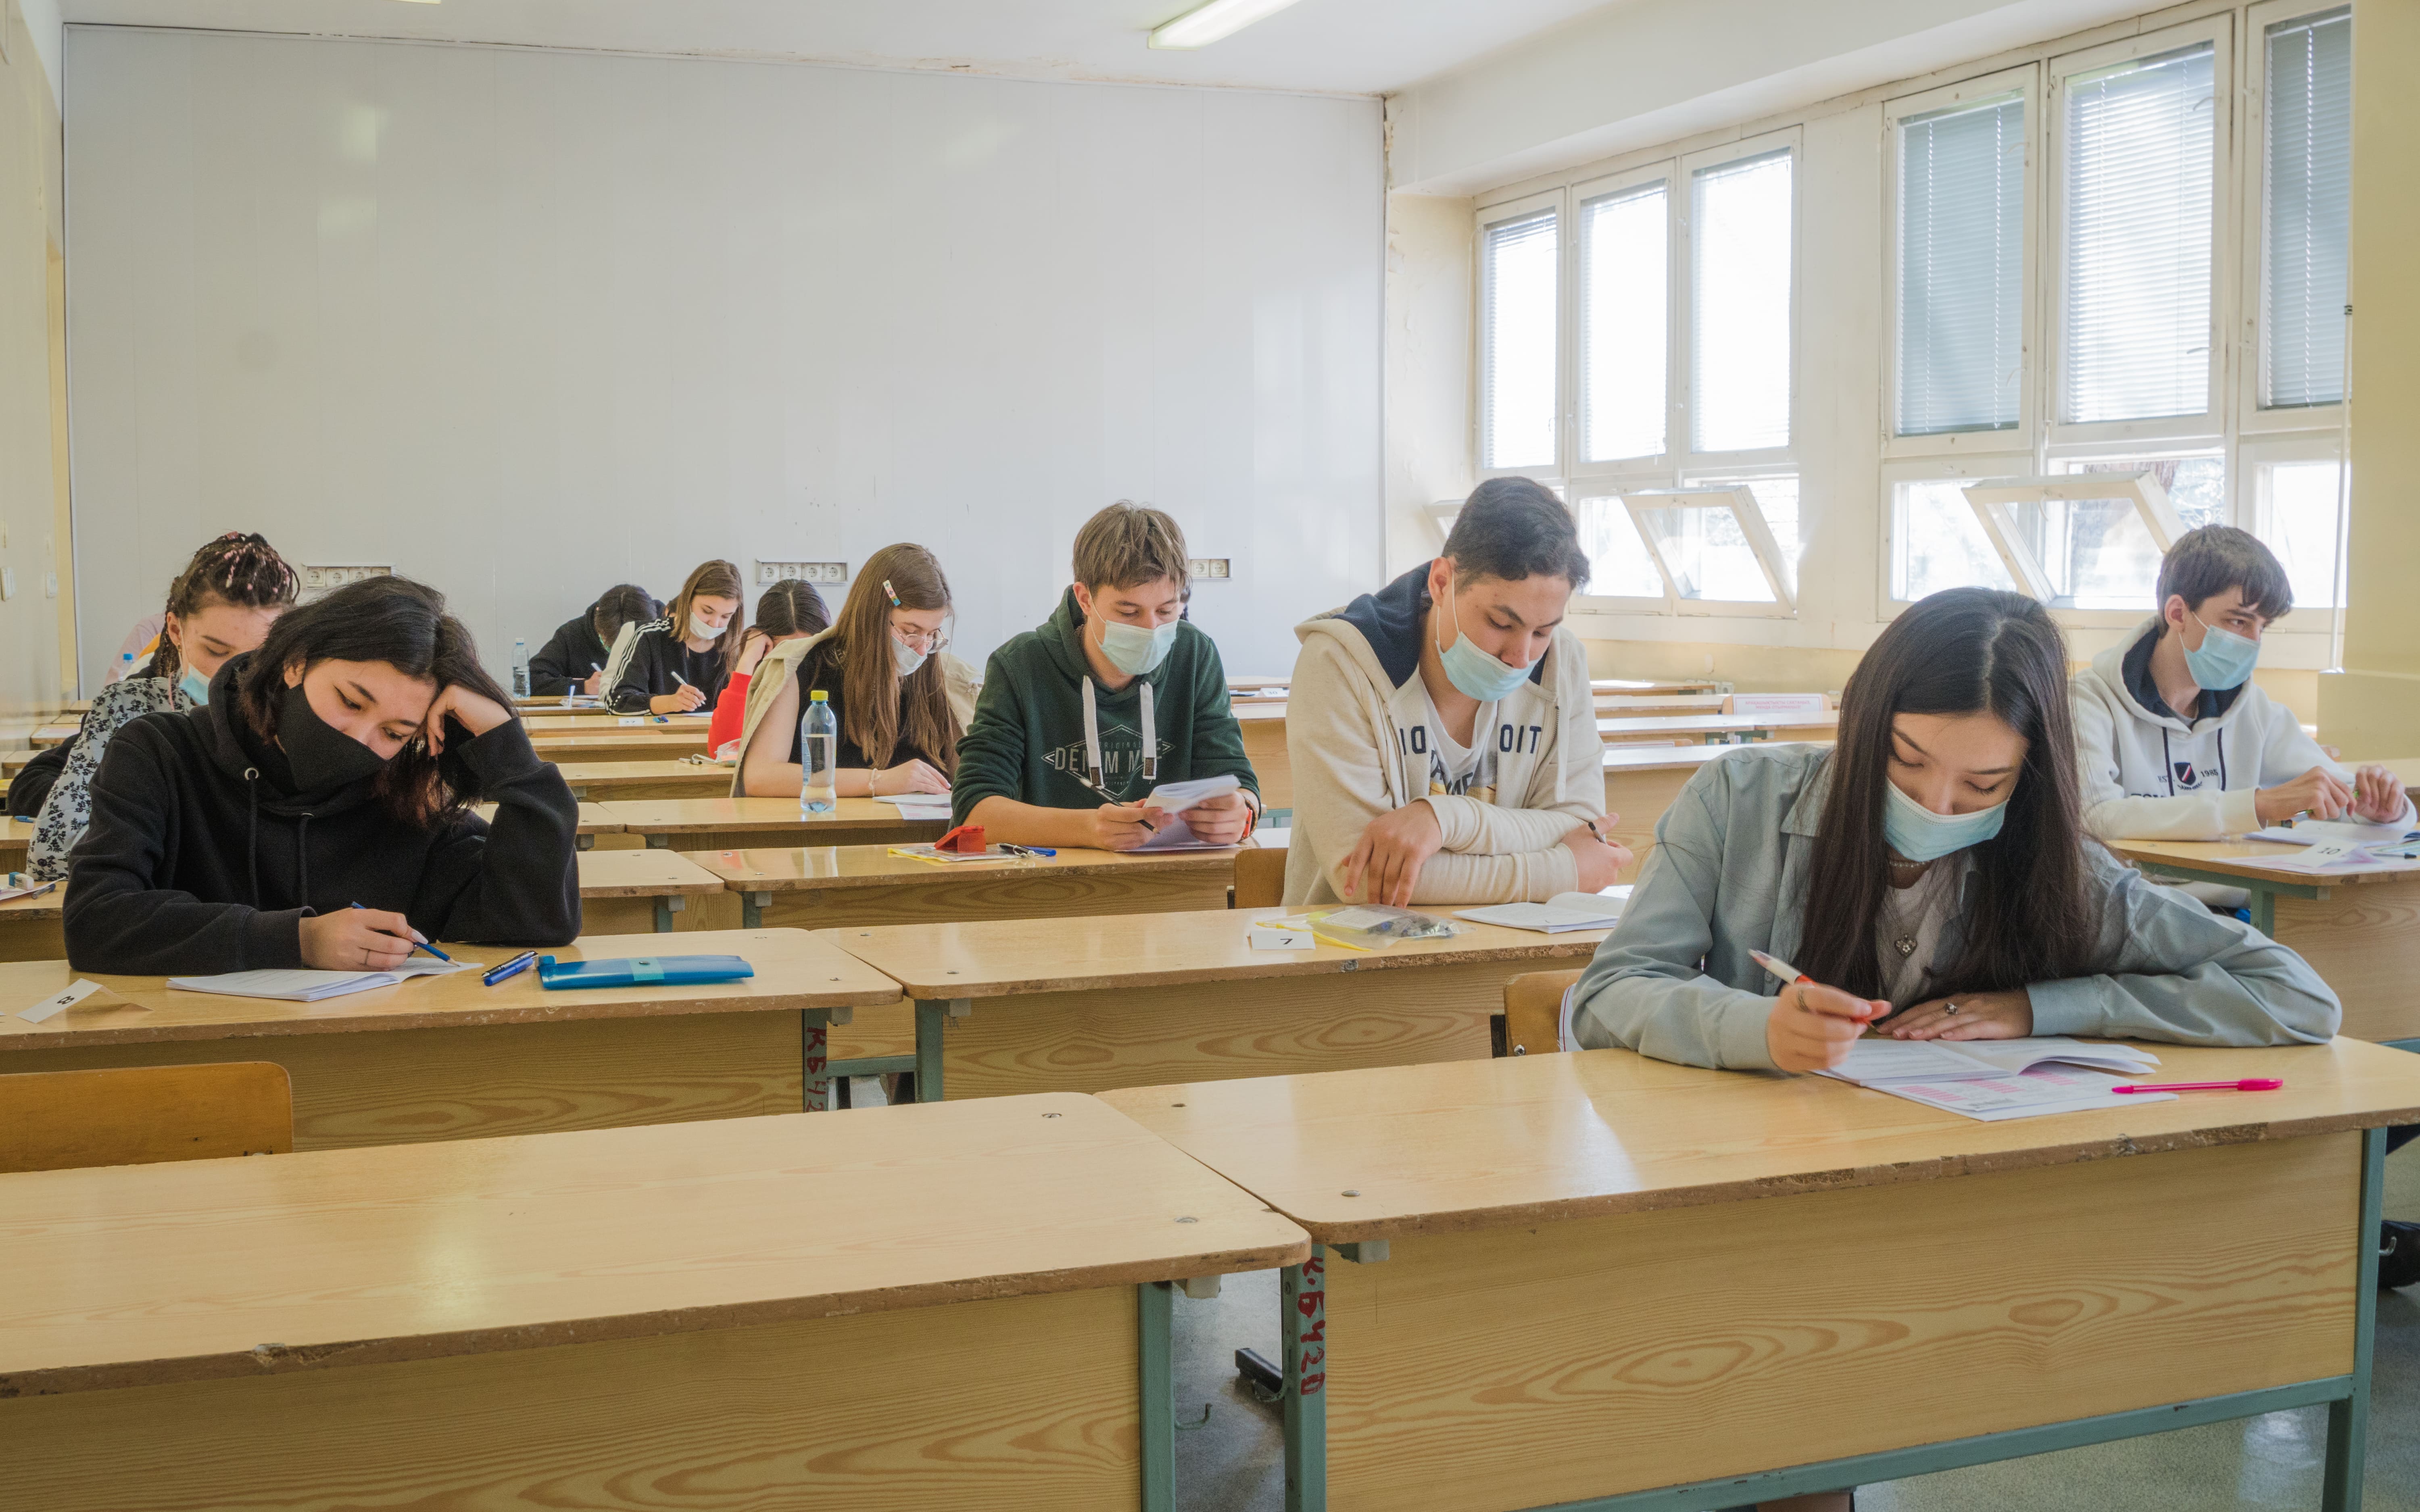 The Trial Unified National Testing for OkBolashak School |11.04.2021